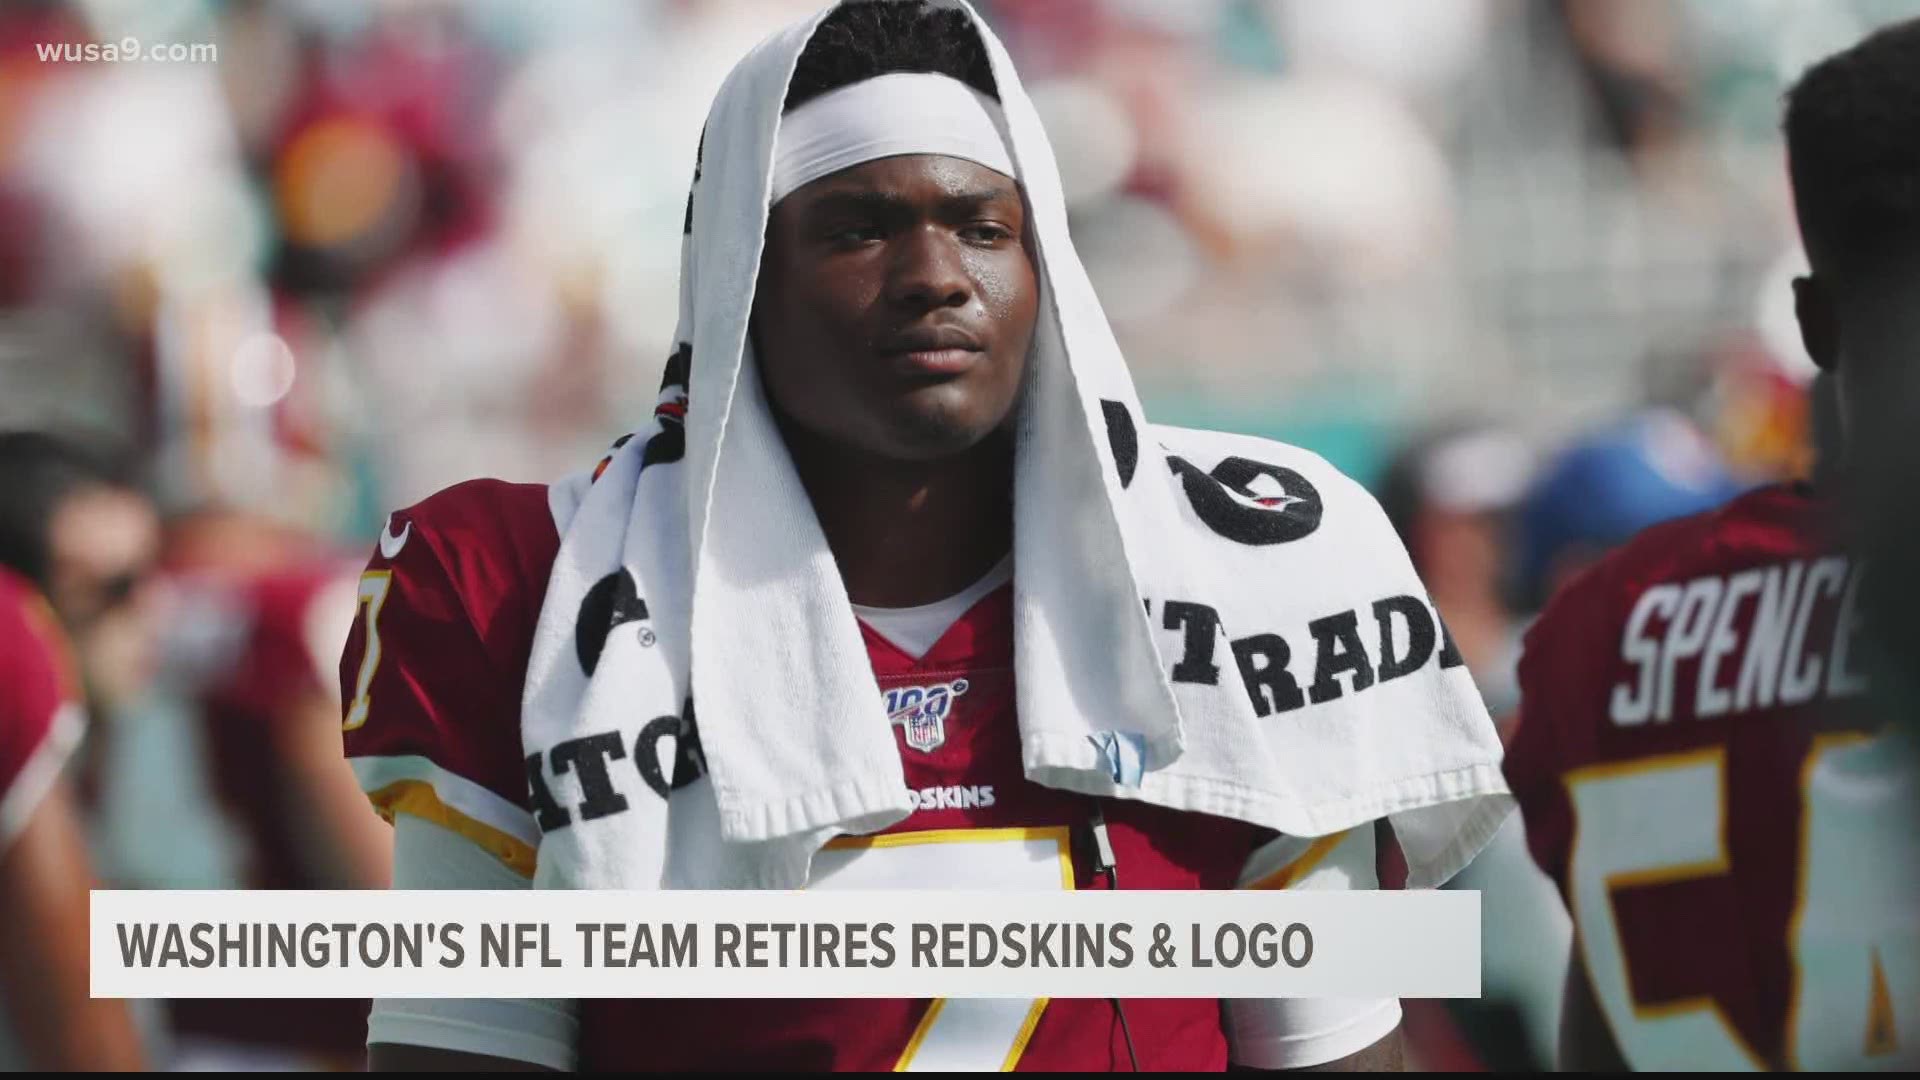 Here is a look at how past and present players have reacted to Washington's NFL team changing its nickname and logo.